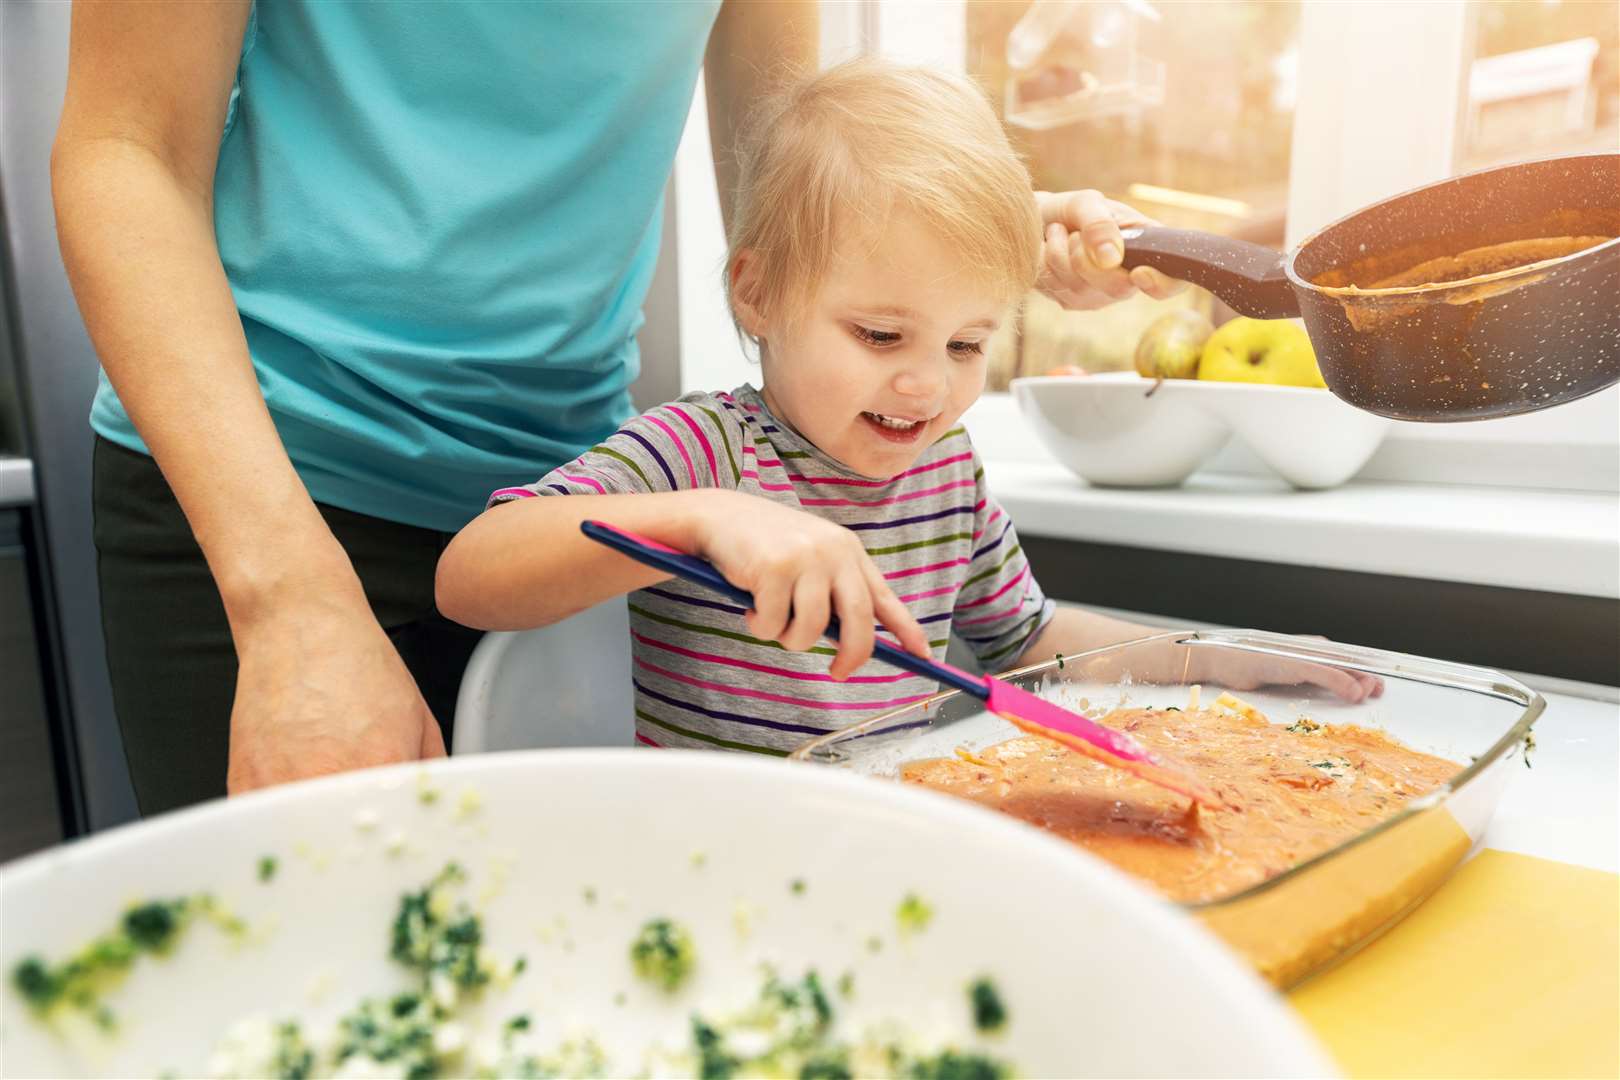 Get the family involved in preparing a meal.